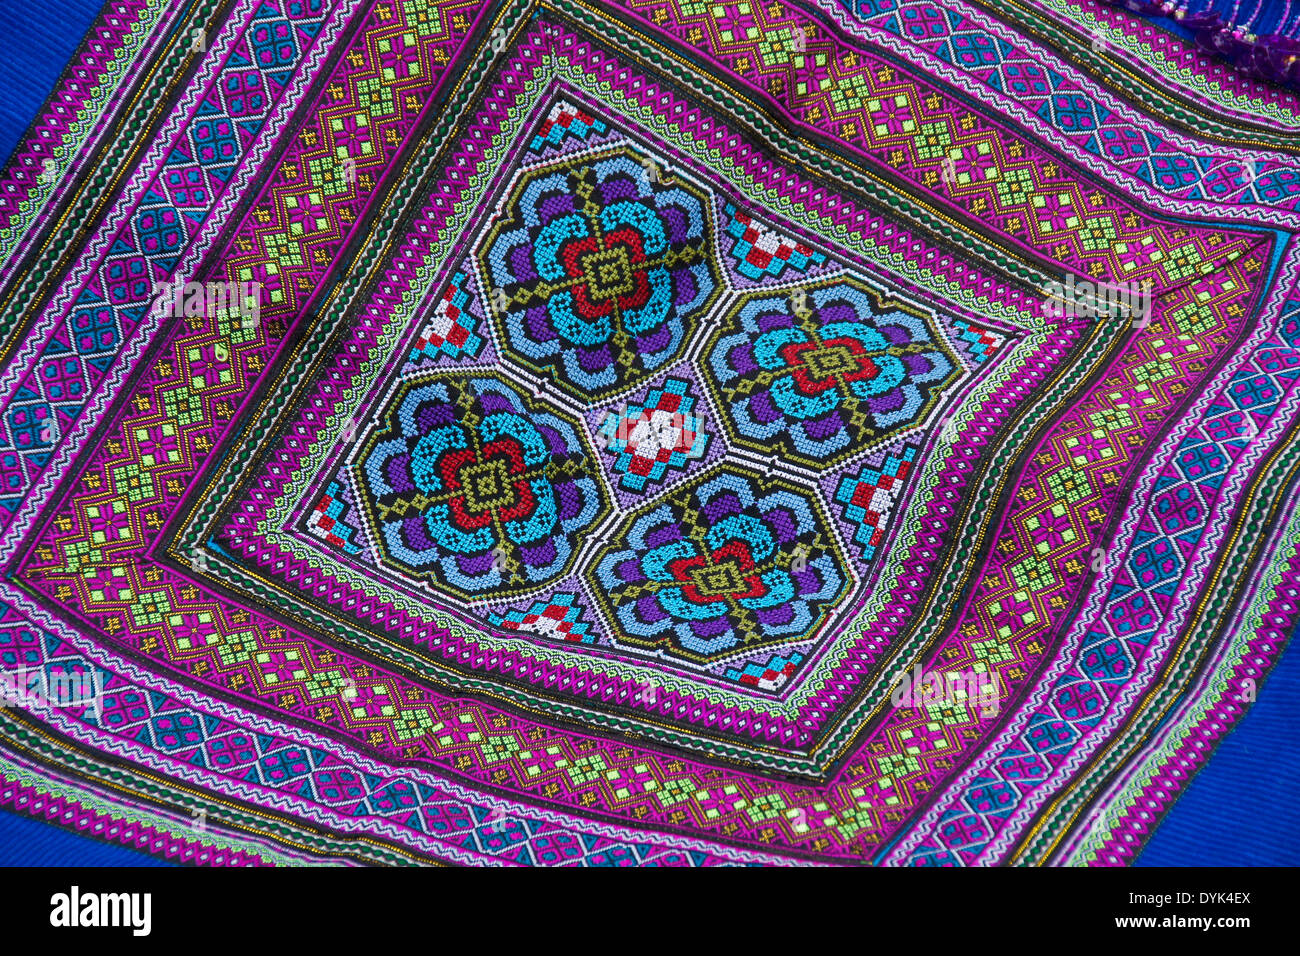 Flower Hmong embroidery for sale in market, Sapa (Sa Pa), North Vietnam Stock Photo